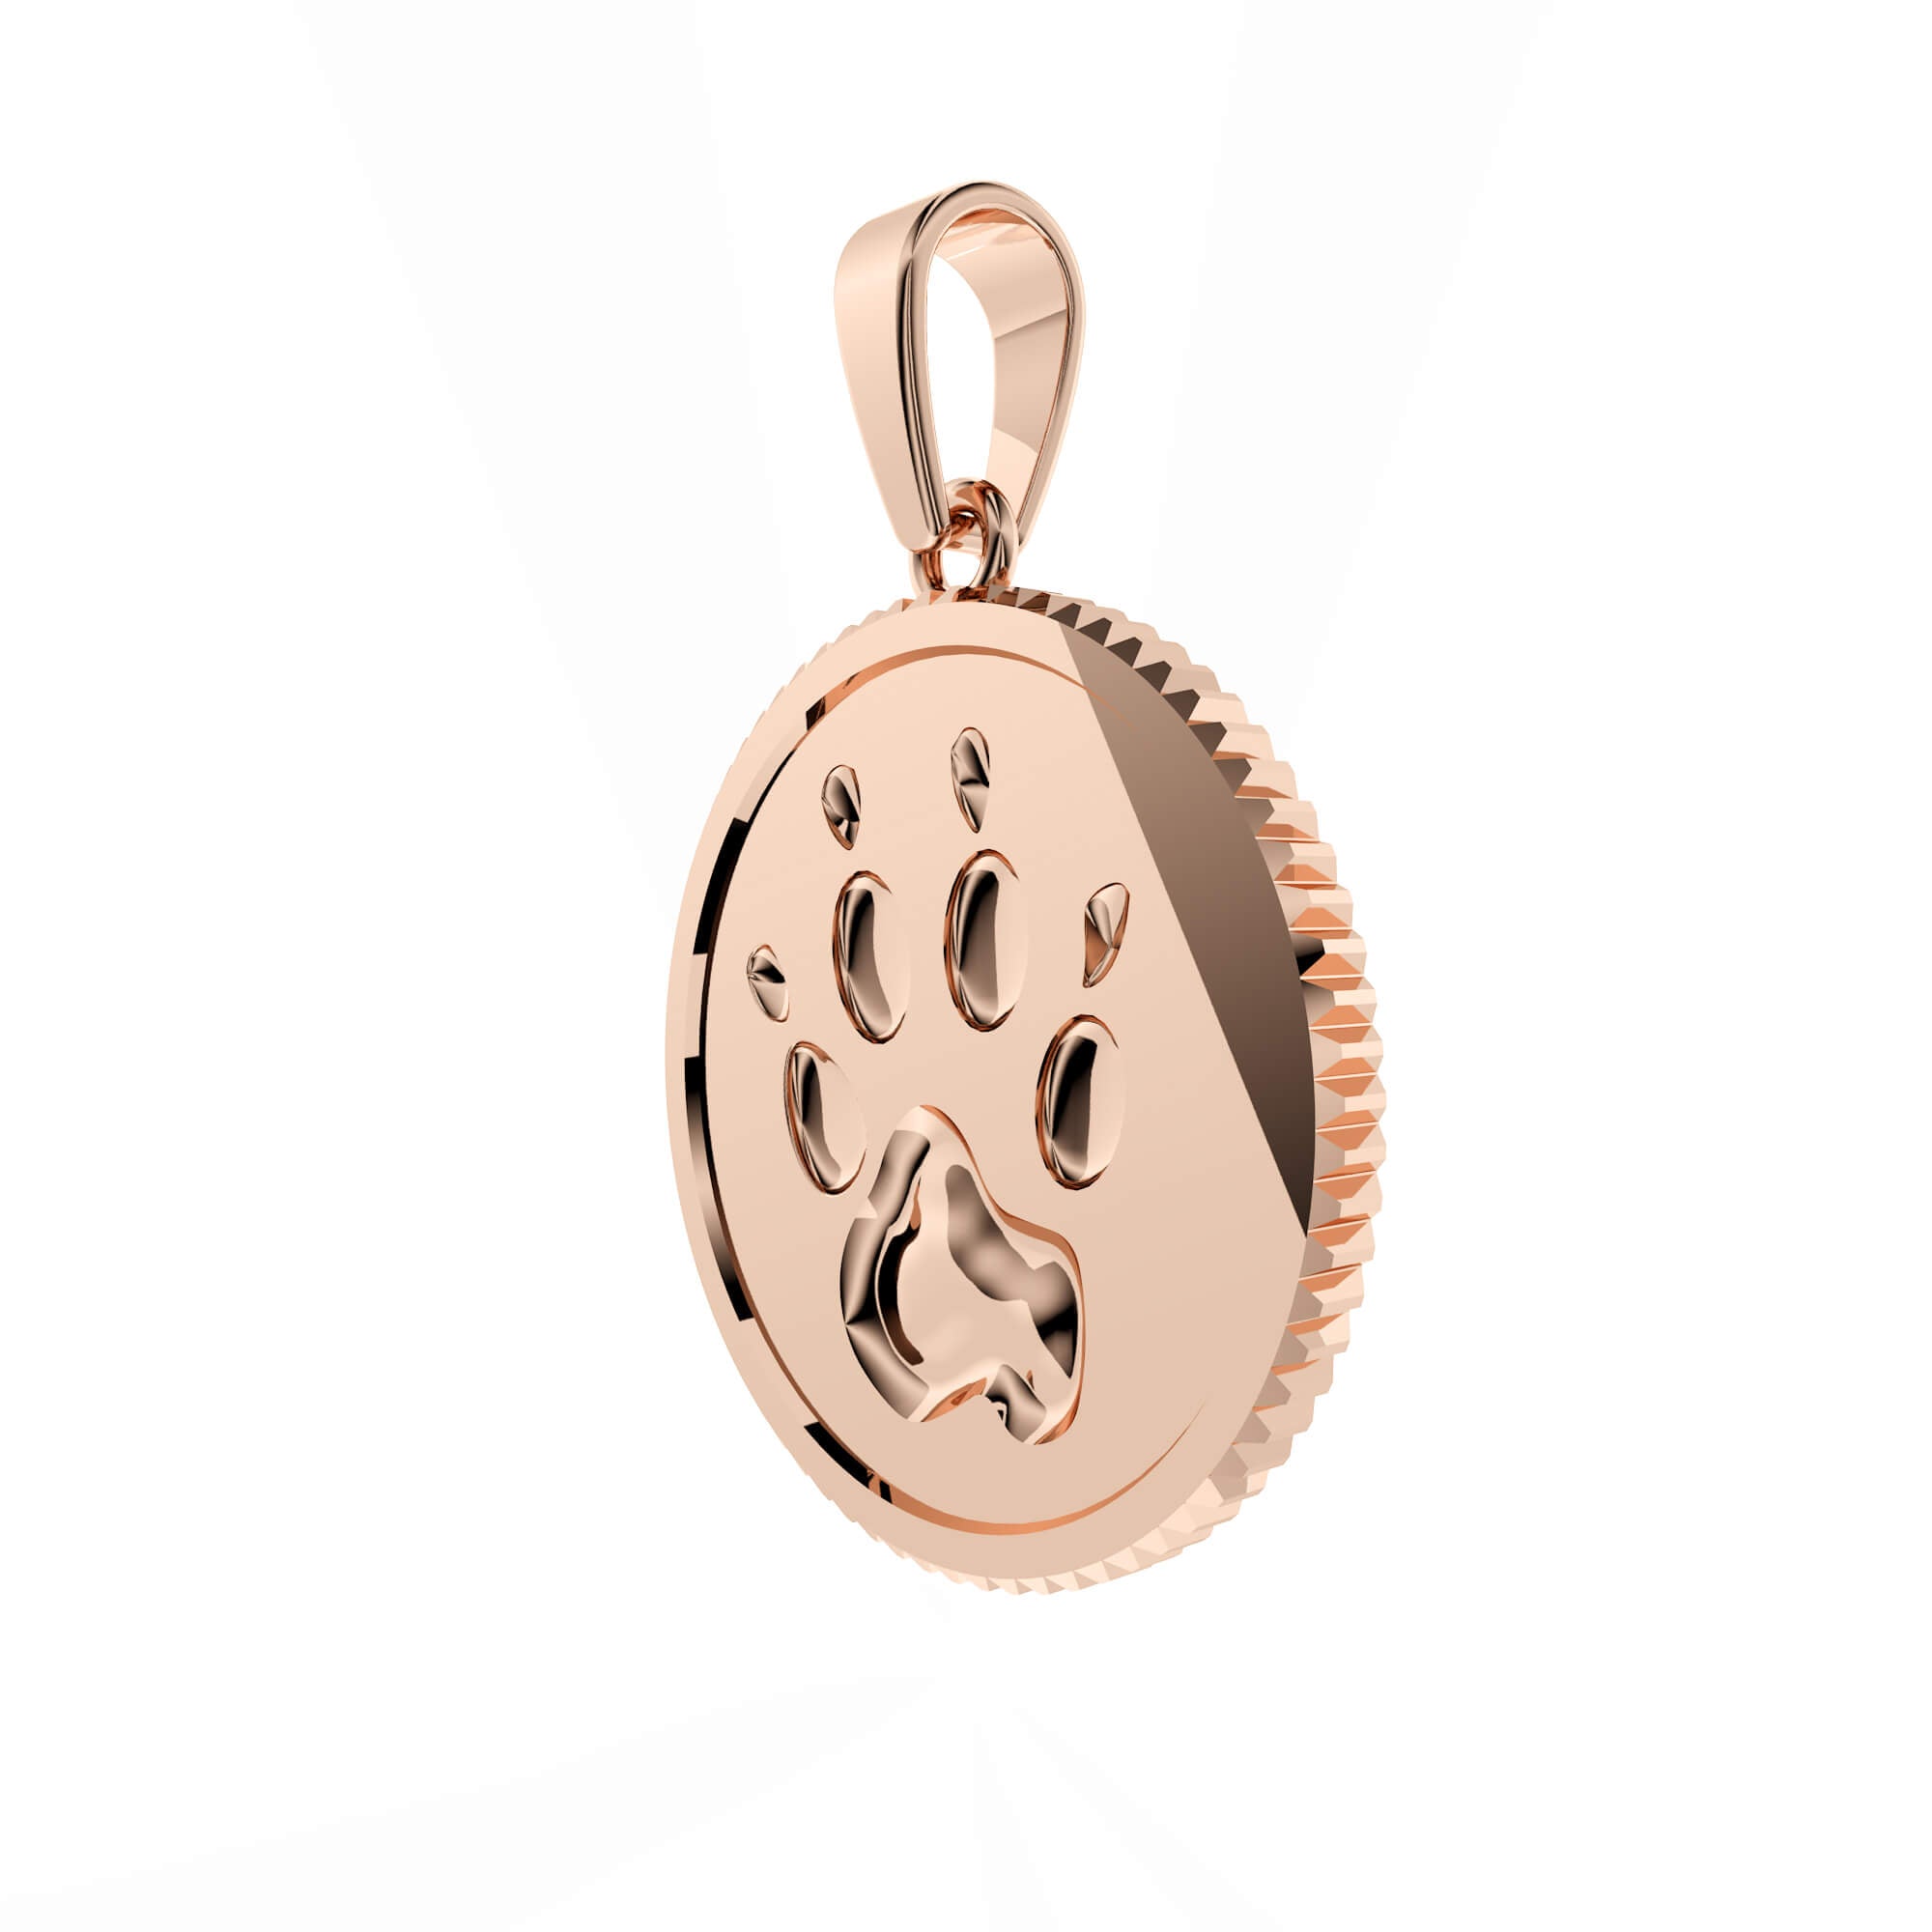 DOG, CAT, PET JEWELRY PENDANT MADE OF ROSE GOLD CUSTOM MADE BY KINGS